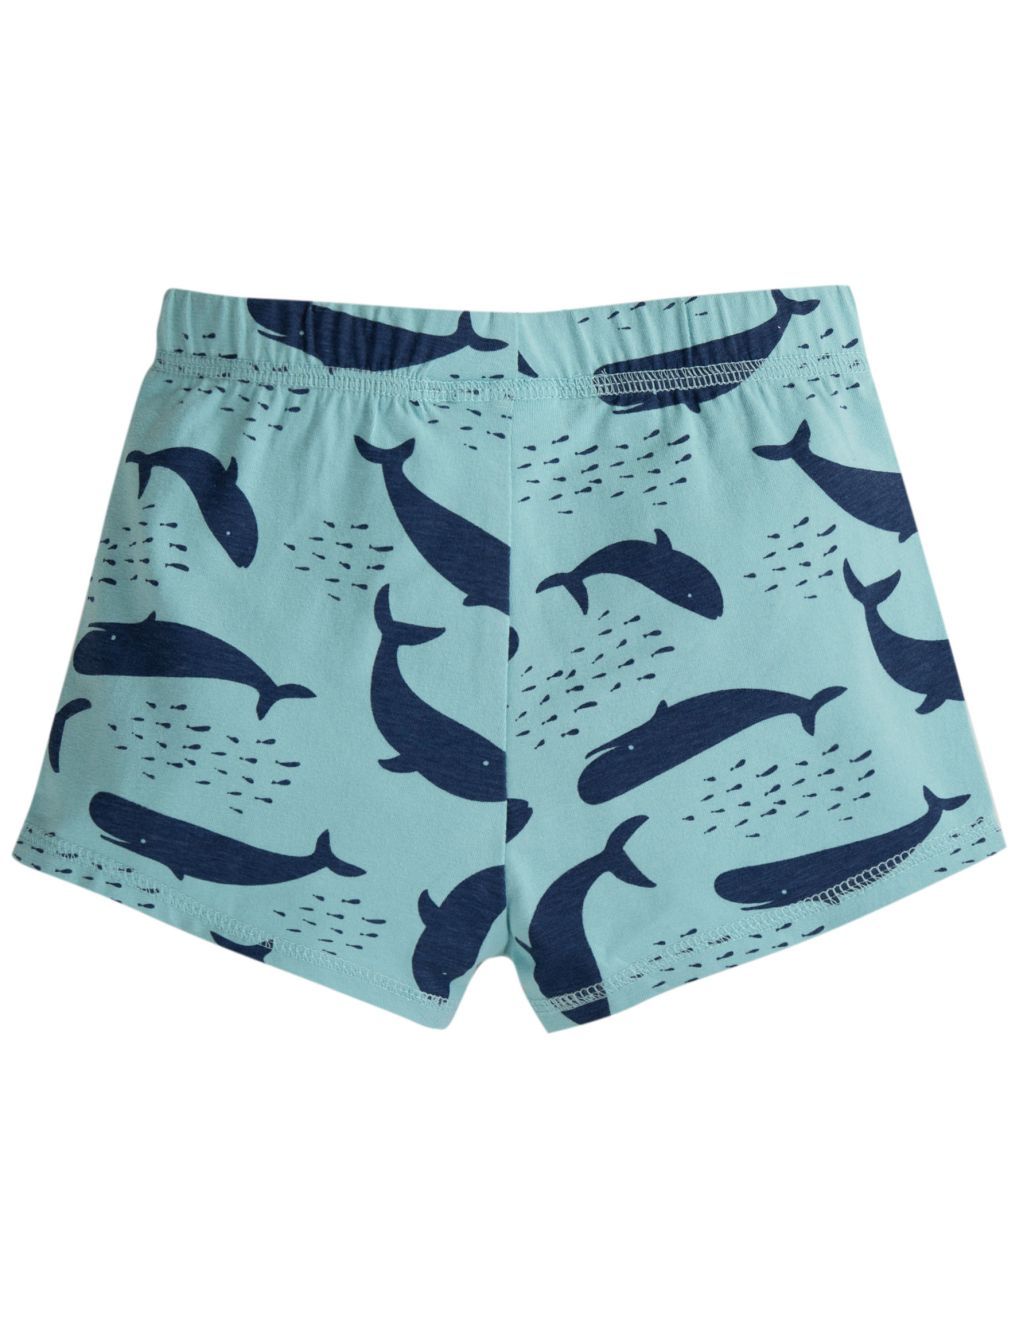 Sean Printed Boxer Trunks Topaz Whale Of A Time 122/128